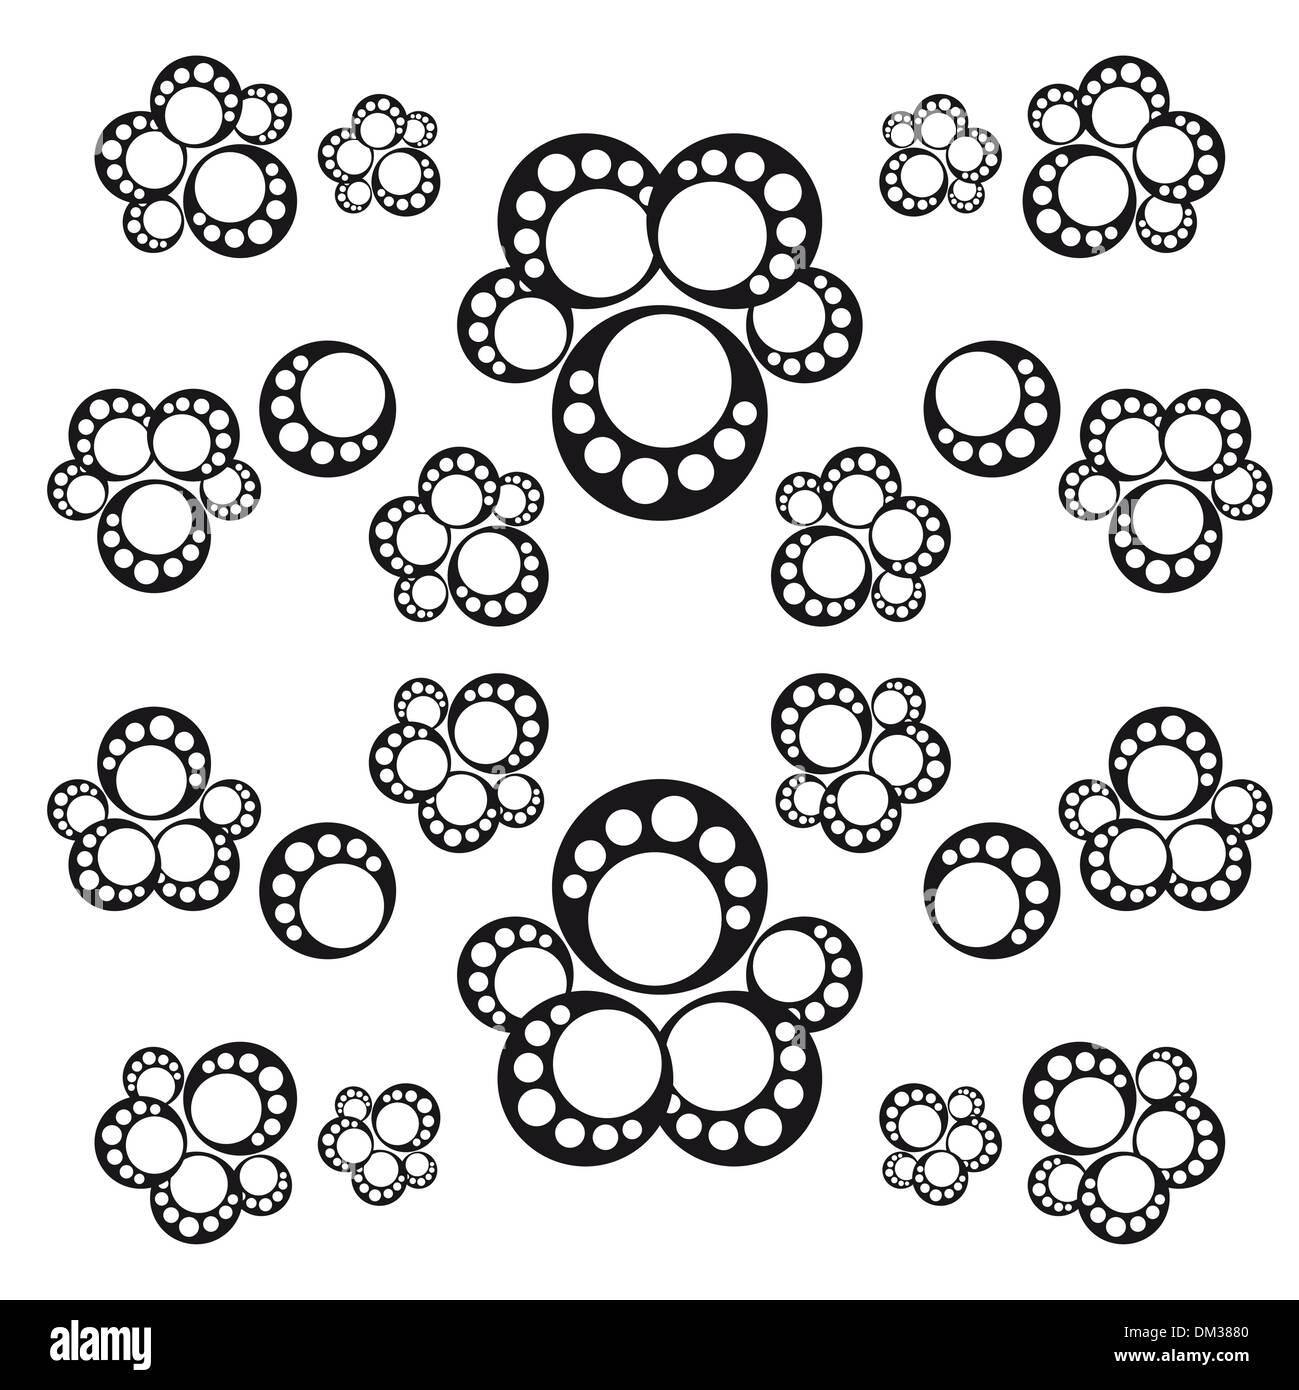 Abstract black and white illustration Stock Vector